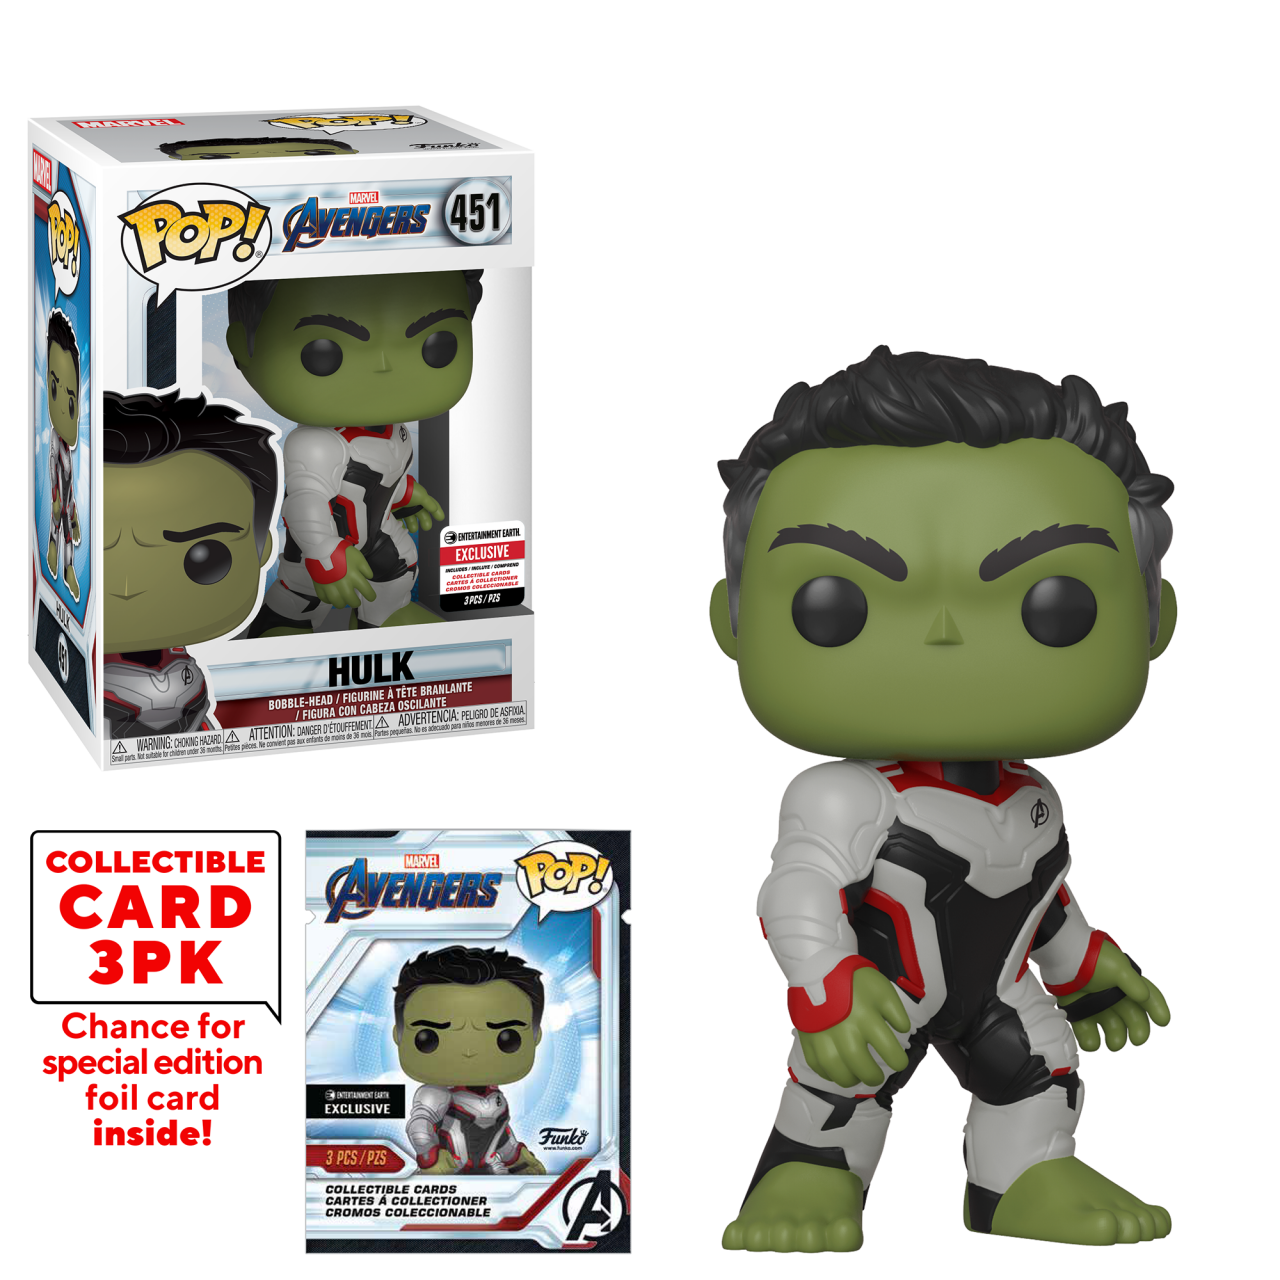 Pop! Marvel Avengers: Endgame - Hulk with Collectible Card 3-Pack